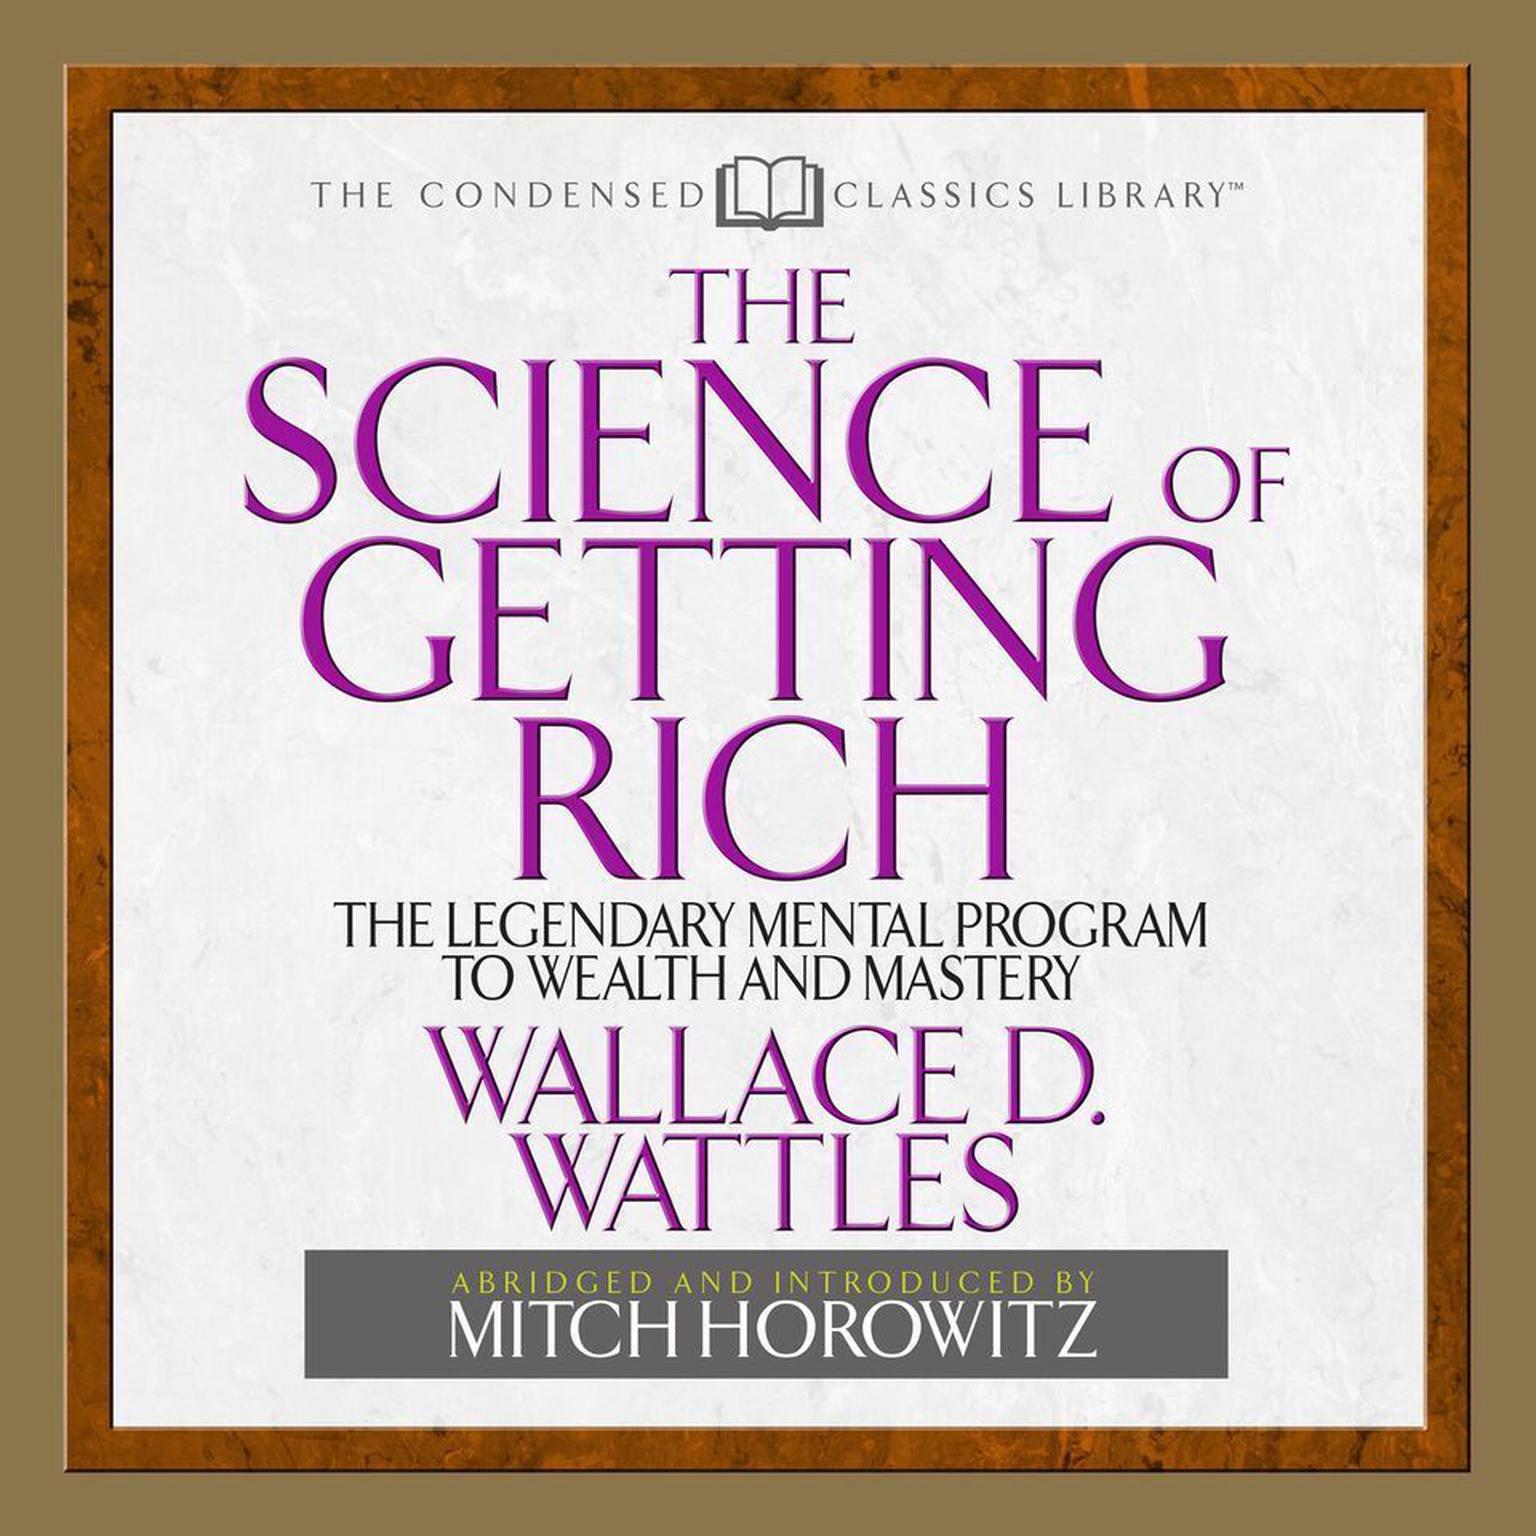 The Science of Getting Rich (Abridged): The Legendary Mental Program To Wealth And Mastery Audiobook, by Wallace D. Wattles